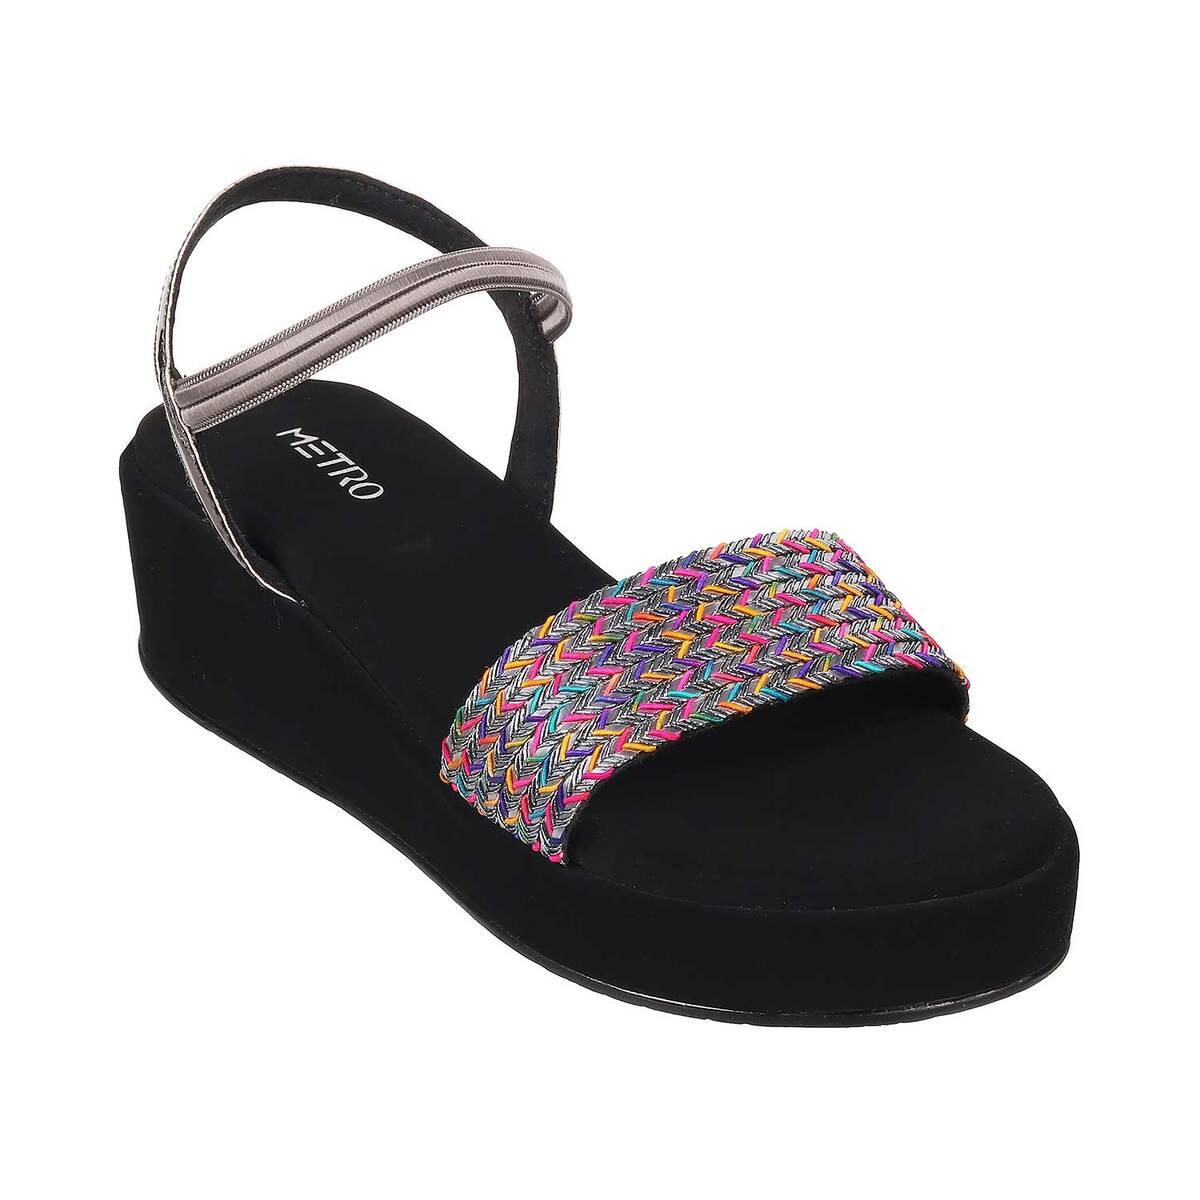 Dchica Sandals  Buy Dchica Black Wedge Heels for Girls Online  Nykaa  Fashion